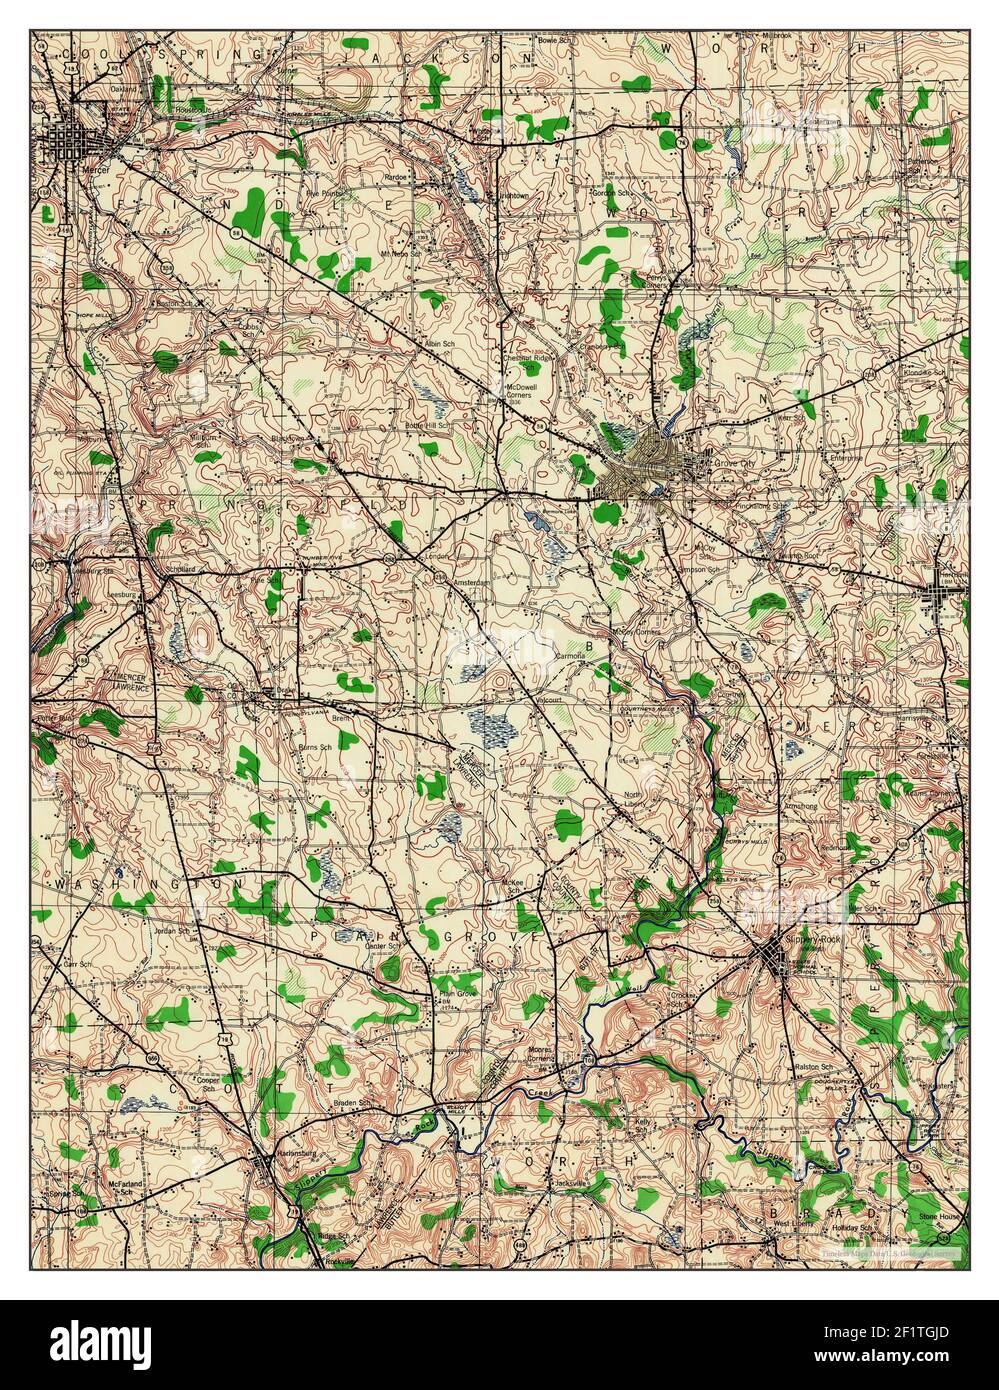 Mercer, Pennsylvania, map 1943, 1:62500, United States of America by Timeless Maps, data U.S. Geological Survey Stock Photo